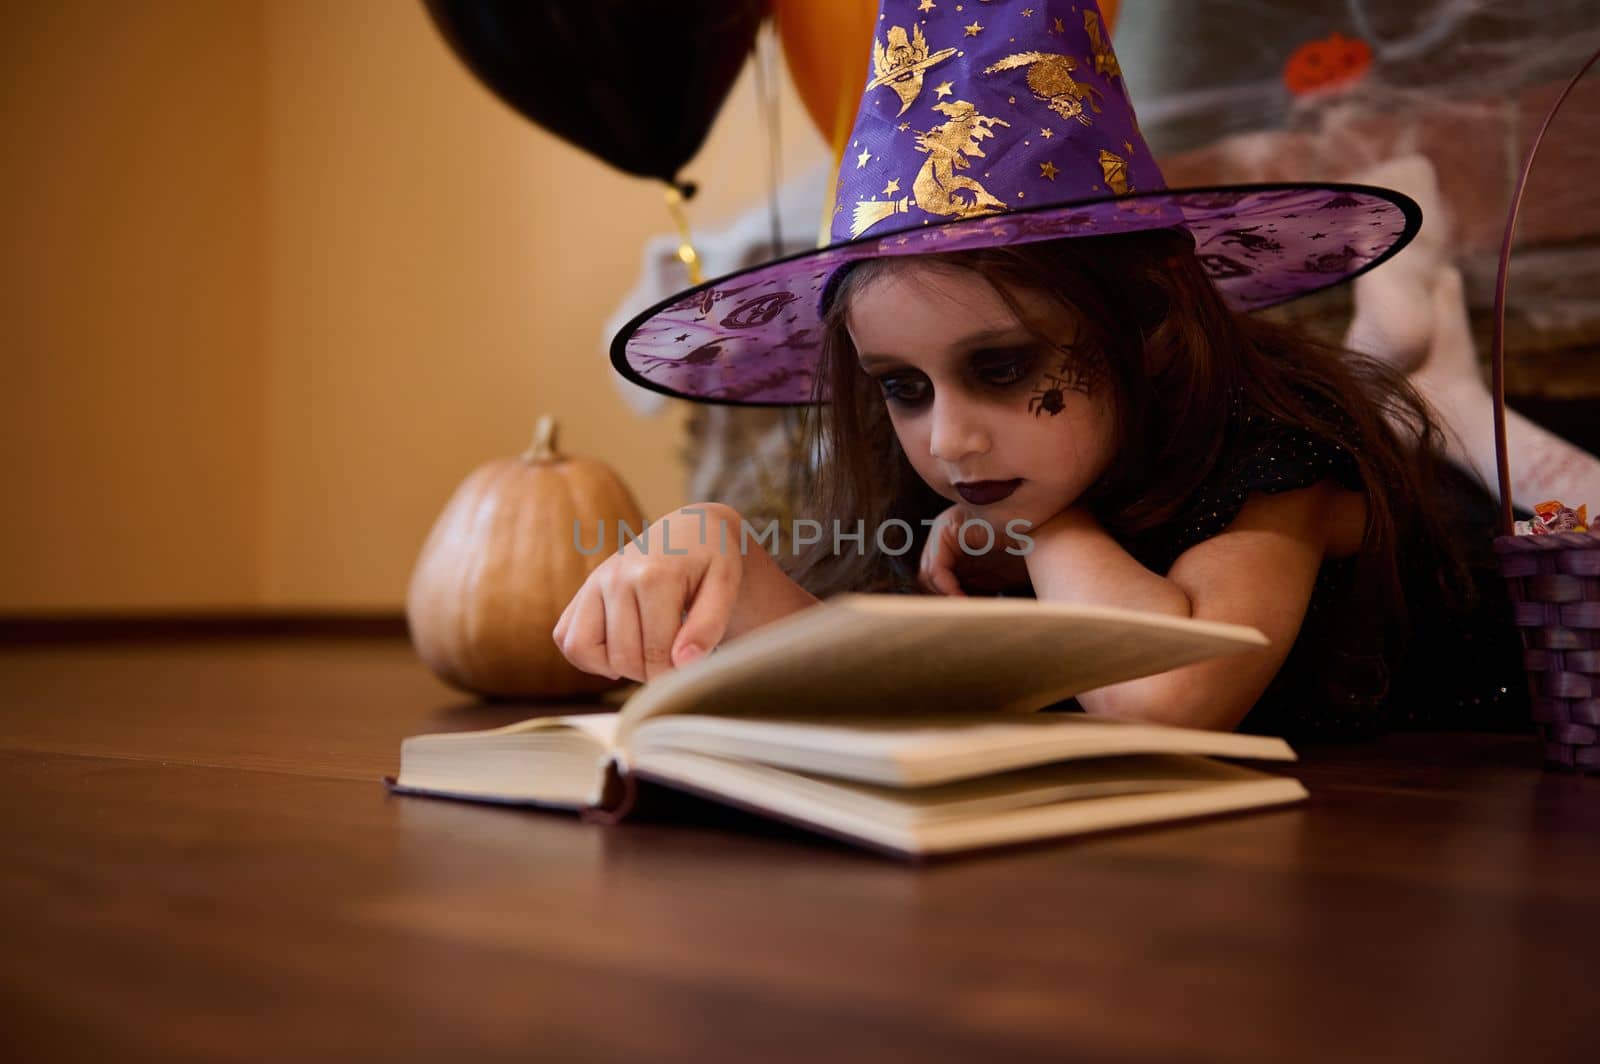 Mischievous little girl with Halloween make-up dressed as witch, sorceress in wizard's hat reading a book of witchcraft by artgf